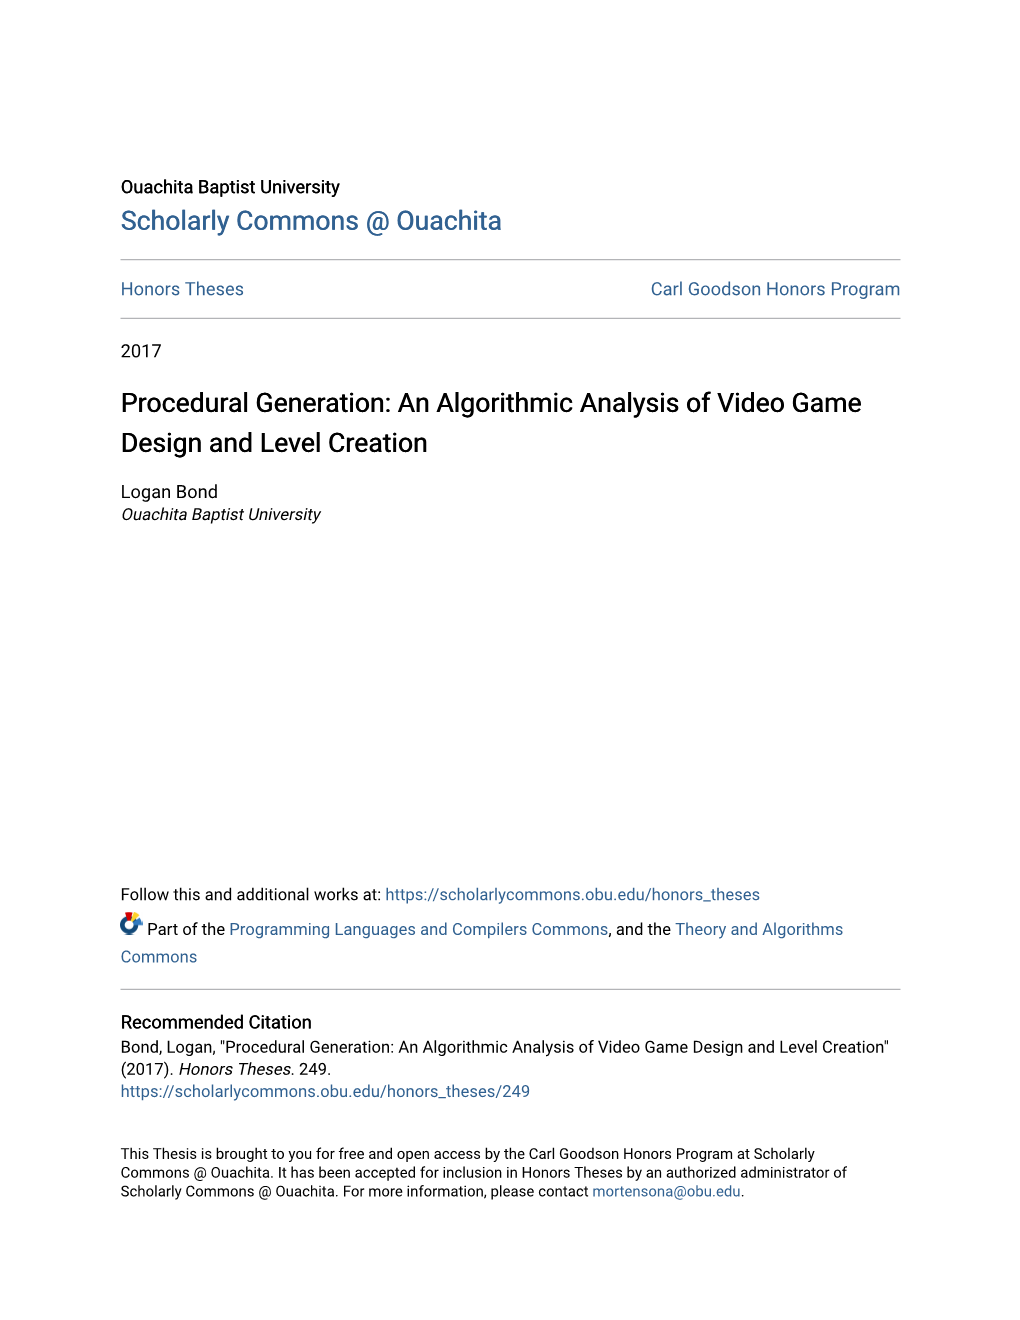 Procedural Generation: an Algorithmic Analysis of Video Game Design and Level Creation